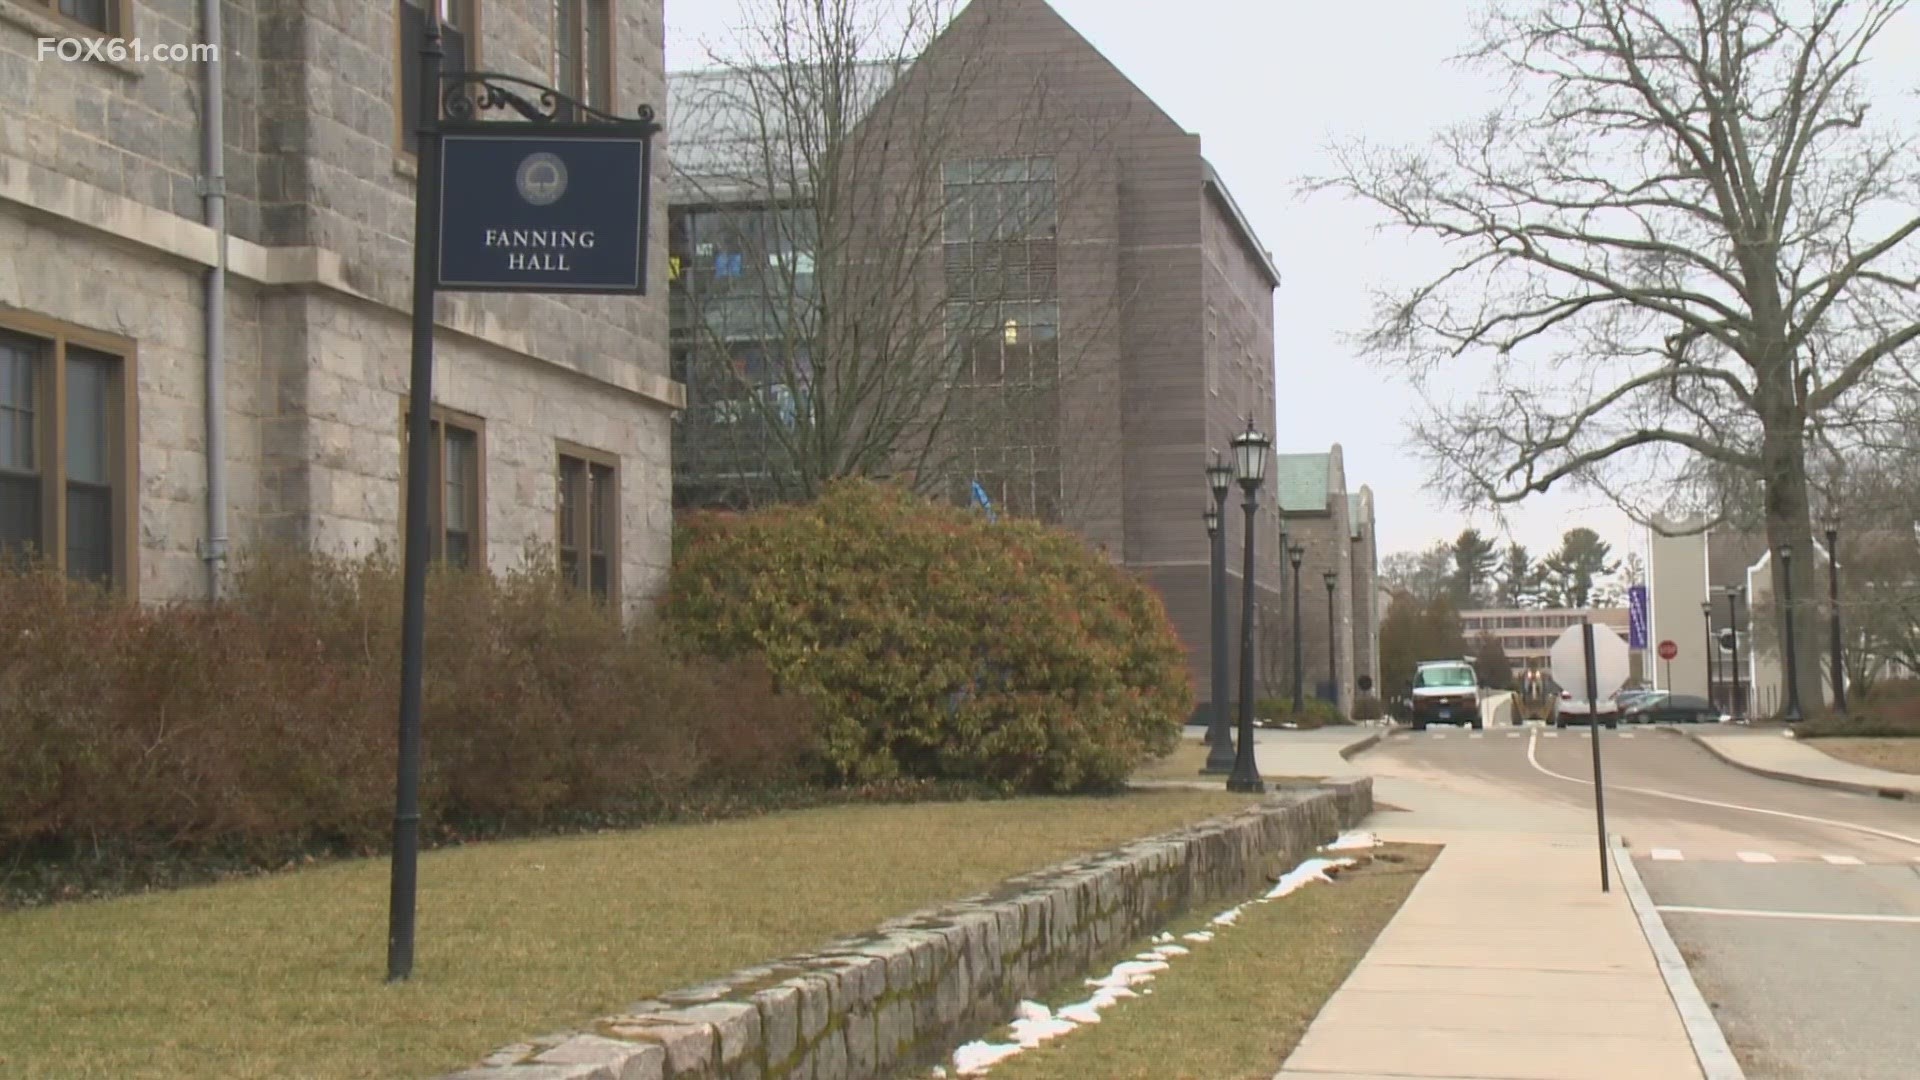 An interim president will be named at a later date as the college searches for a new president.